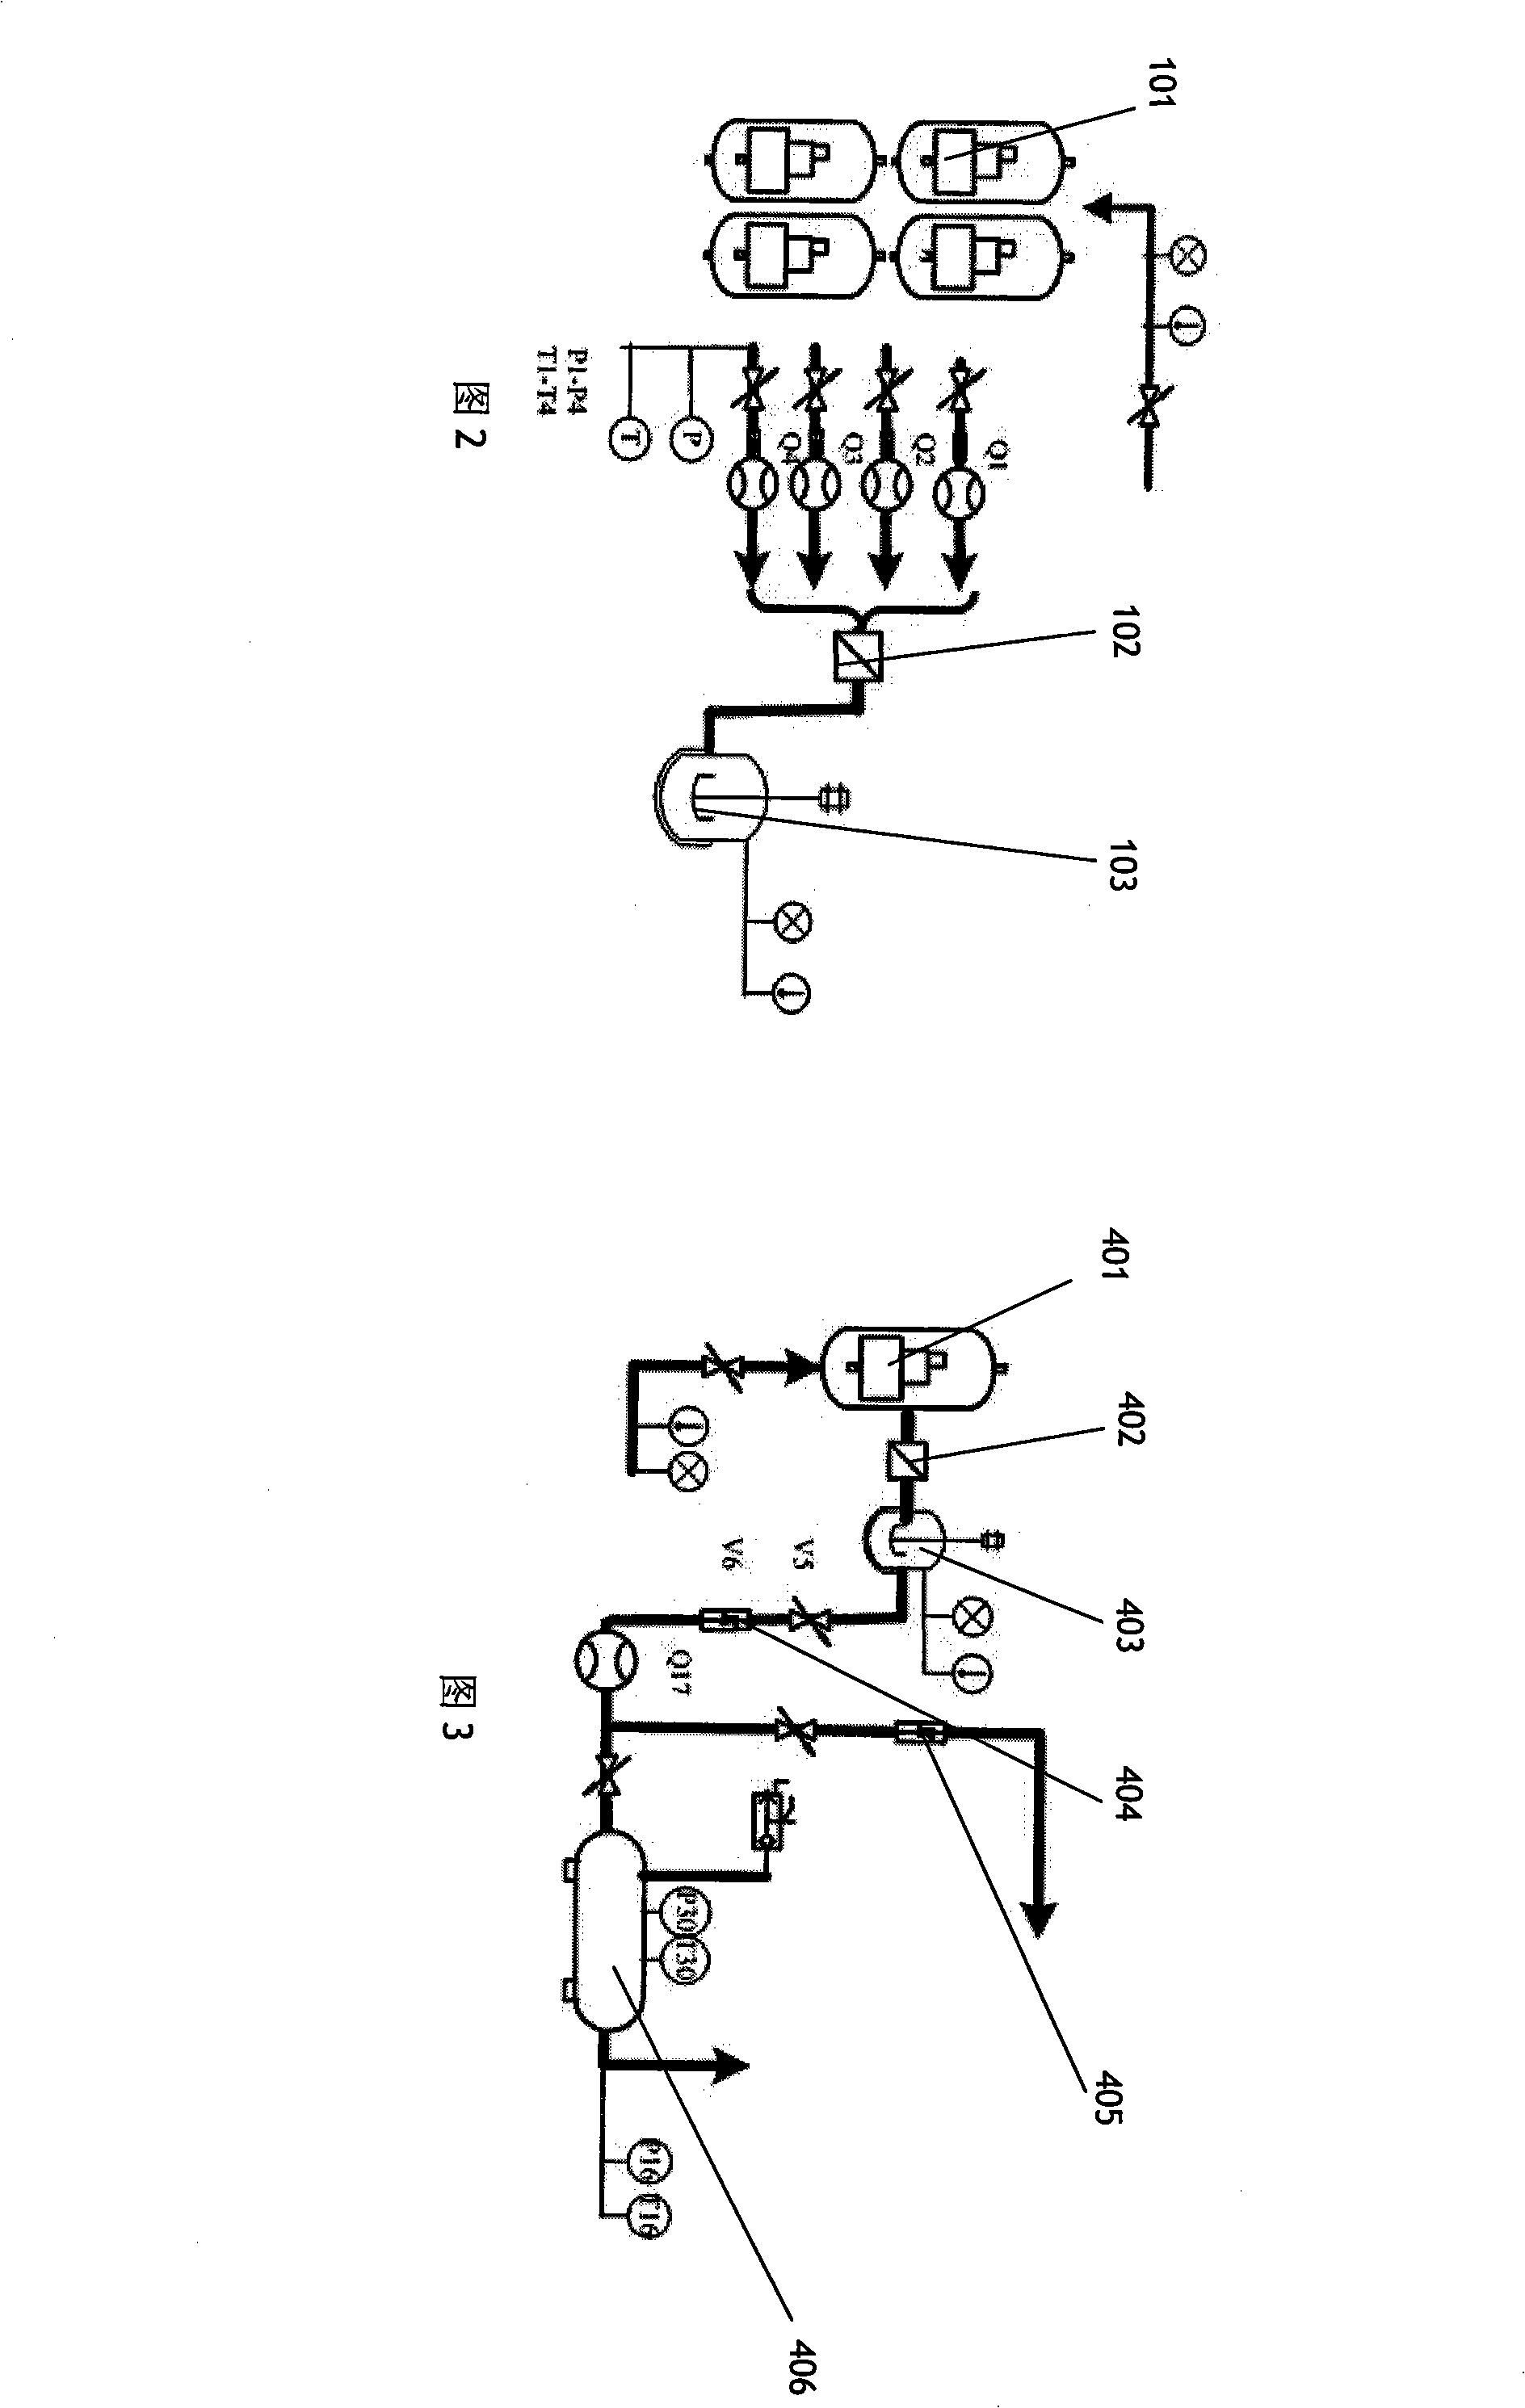 Double-working medium refrigeration experiment system used for turbine blade of gas turbine